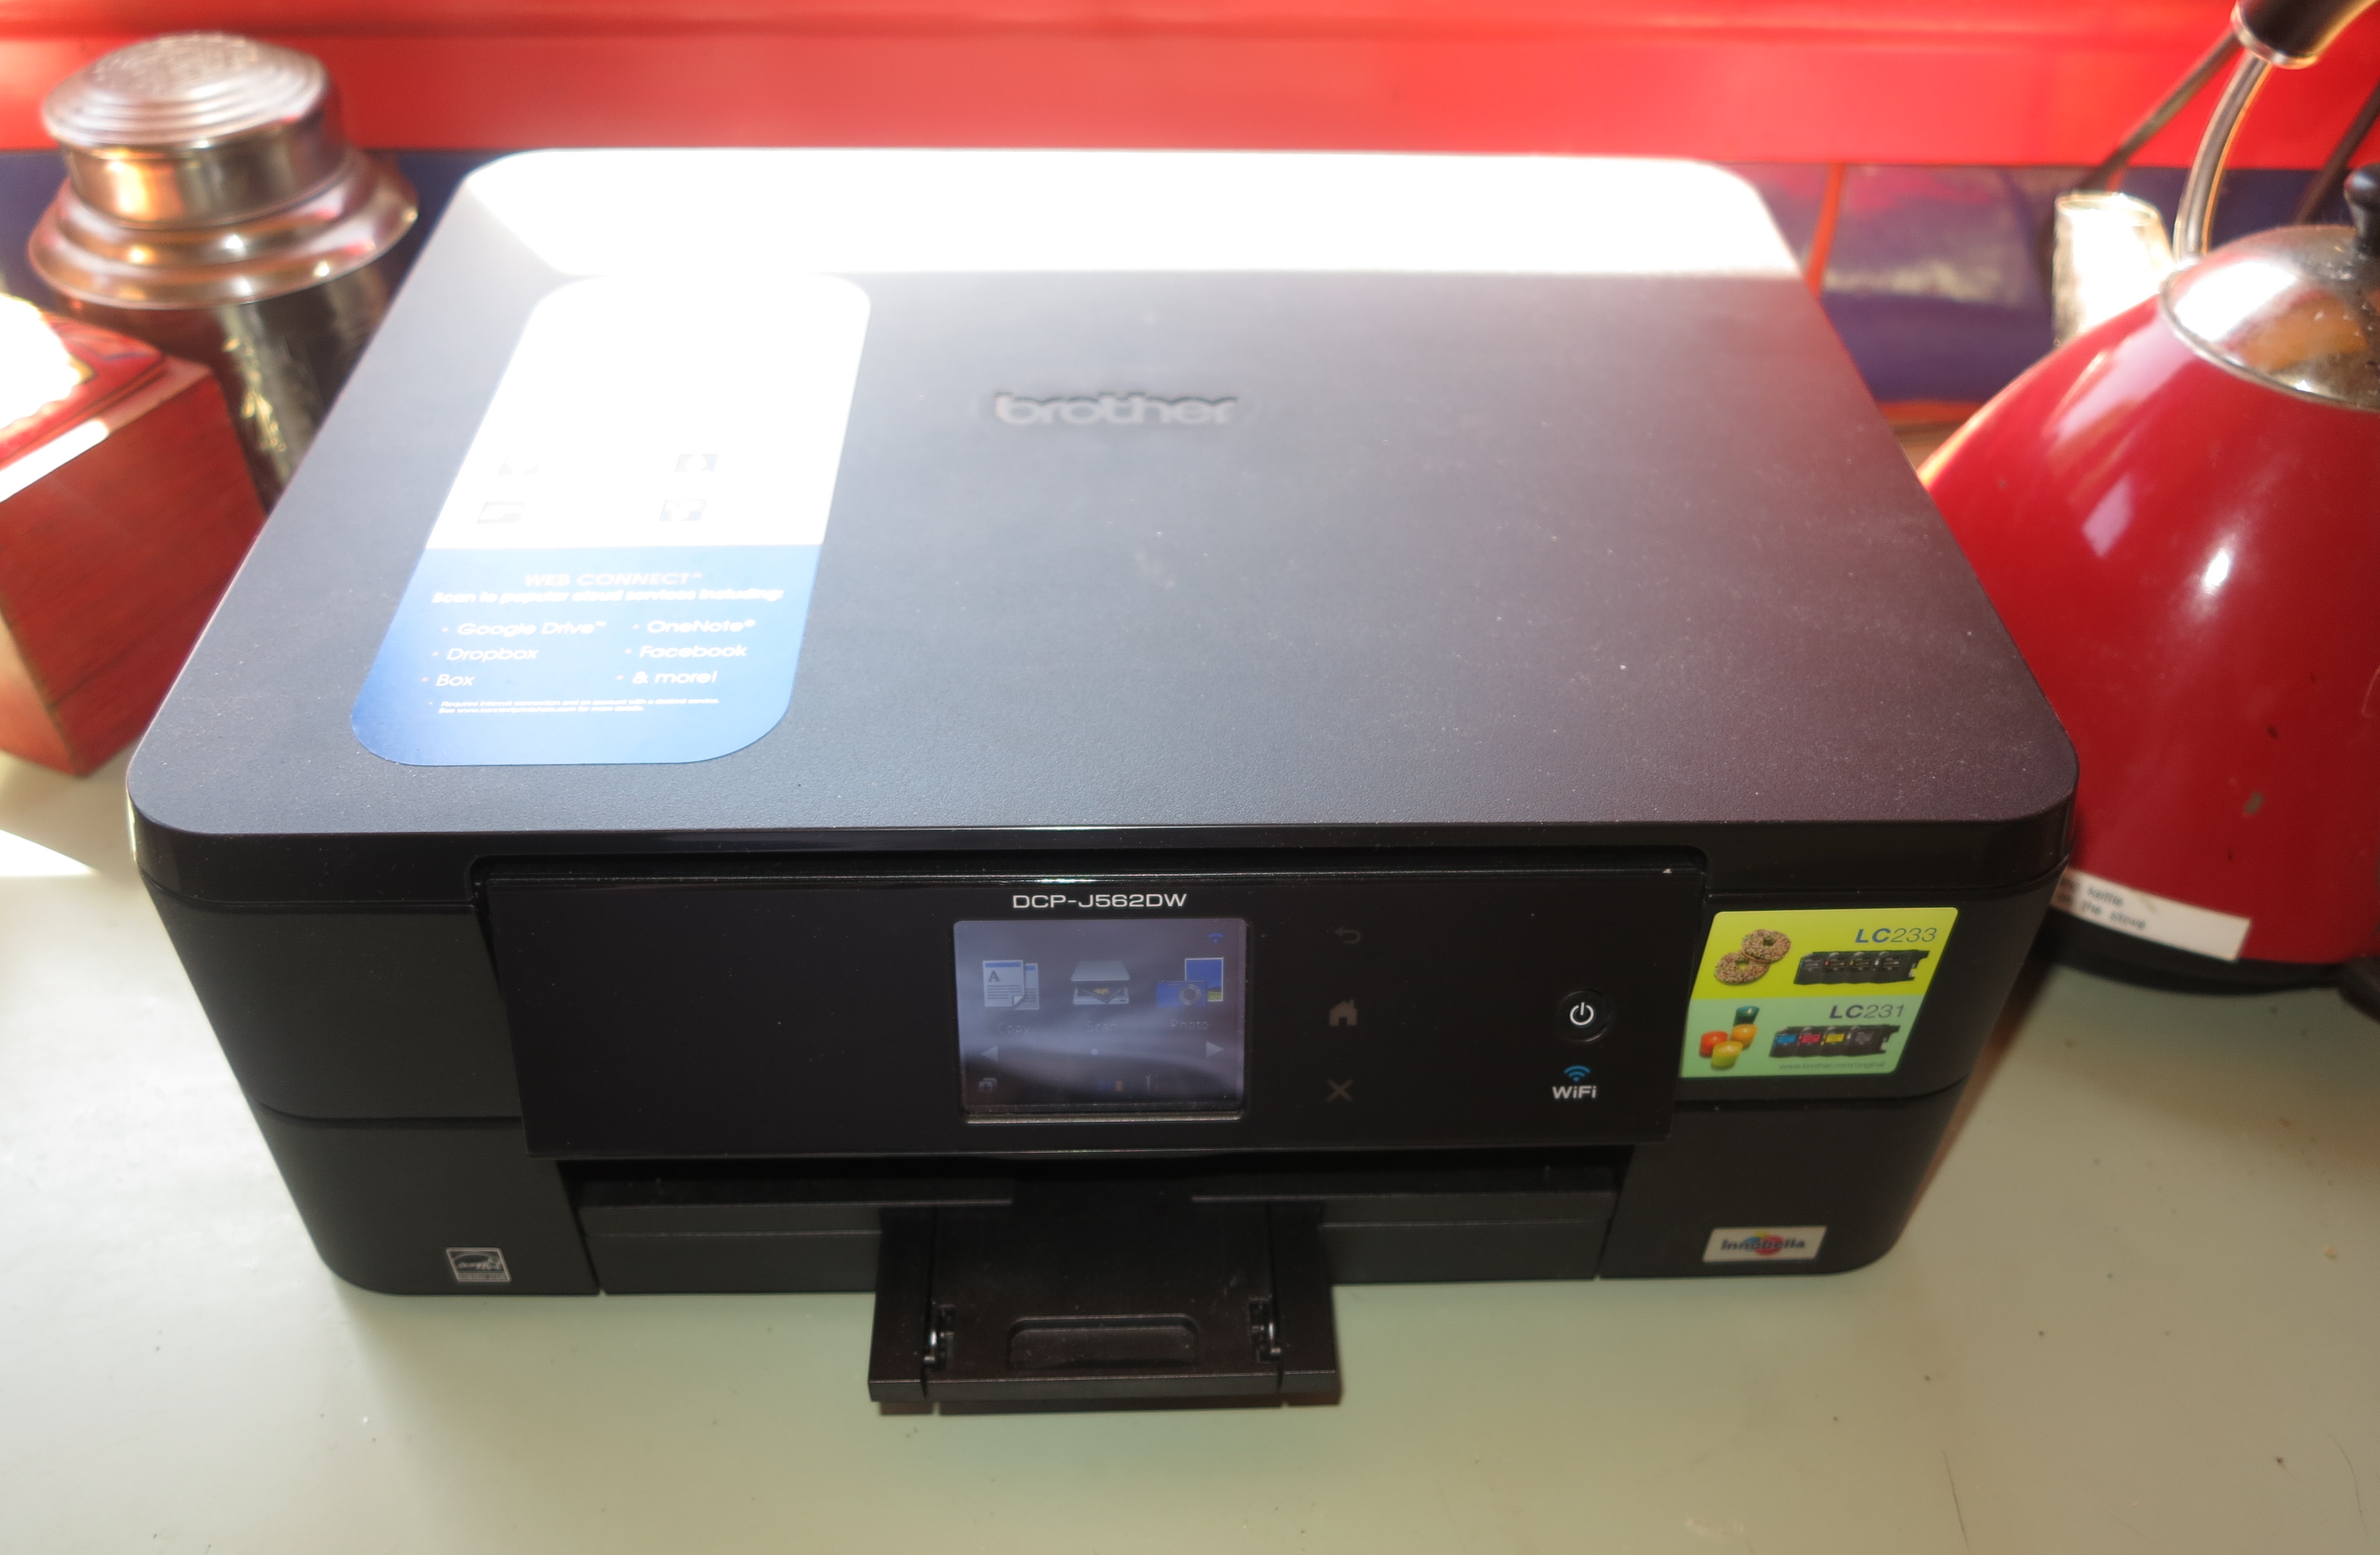 Product Review–Brother DCP-J562DW Inkjet Multifunction Printer